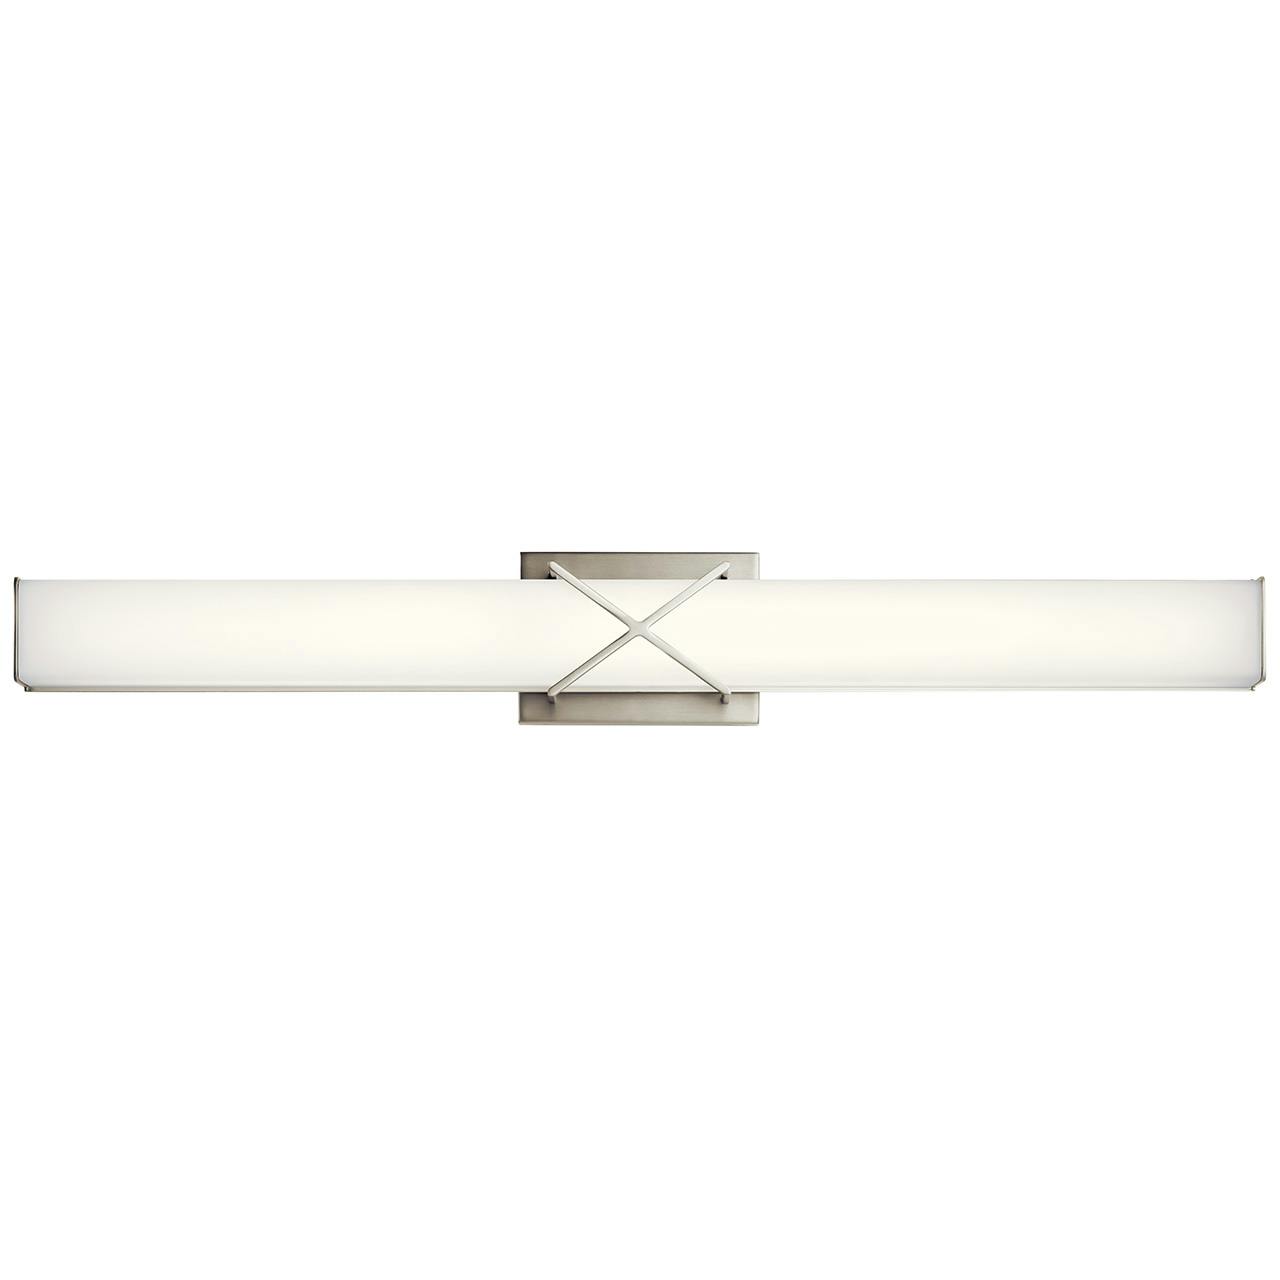 Product image of the 45658NILED shown hung horizontally